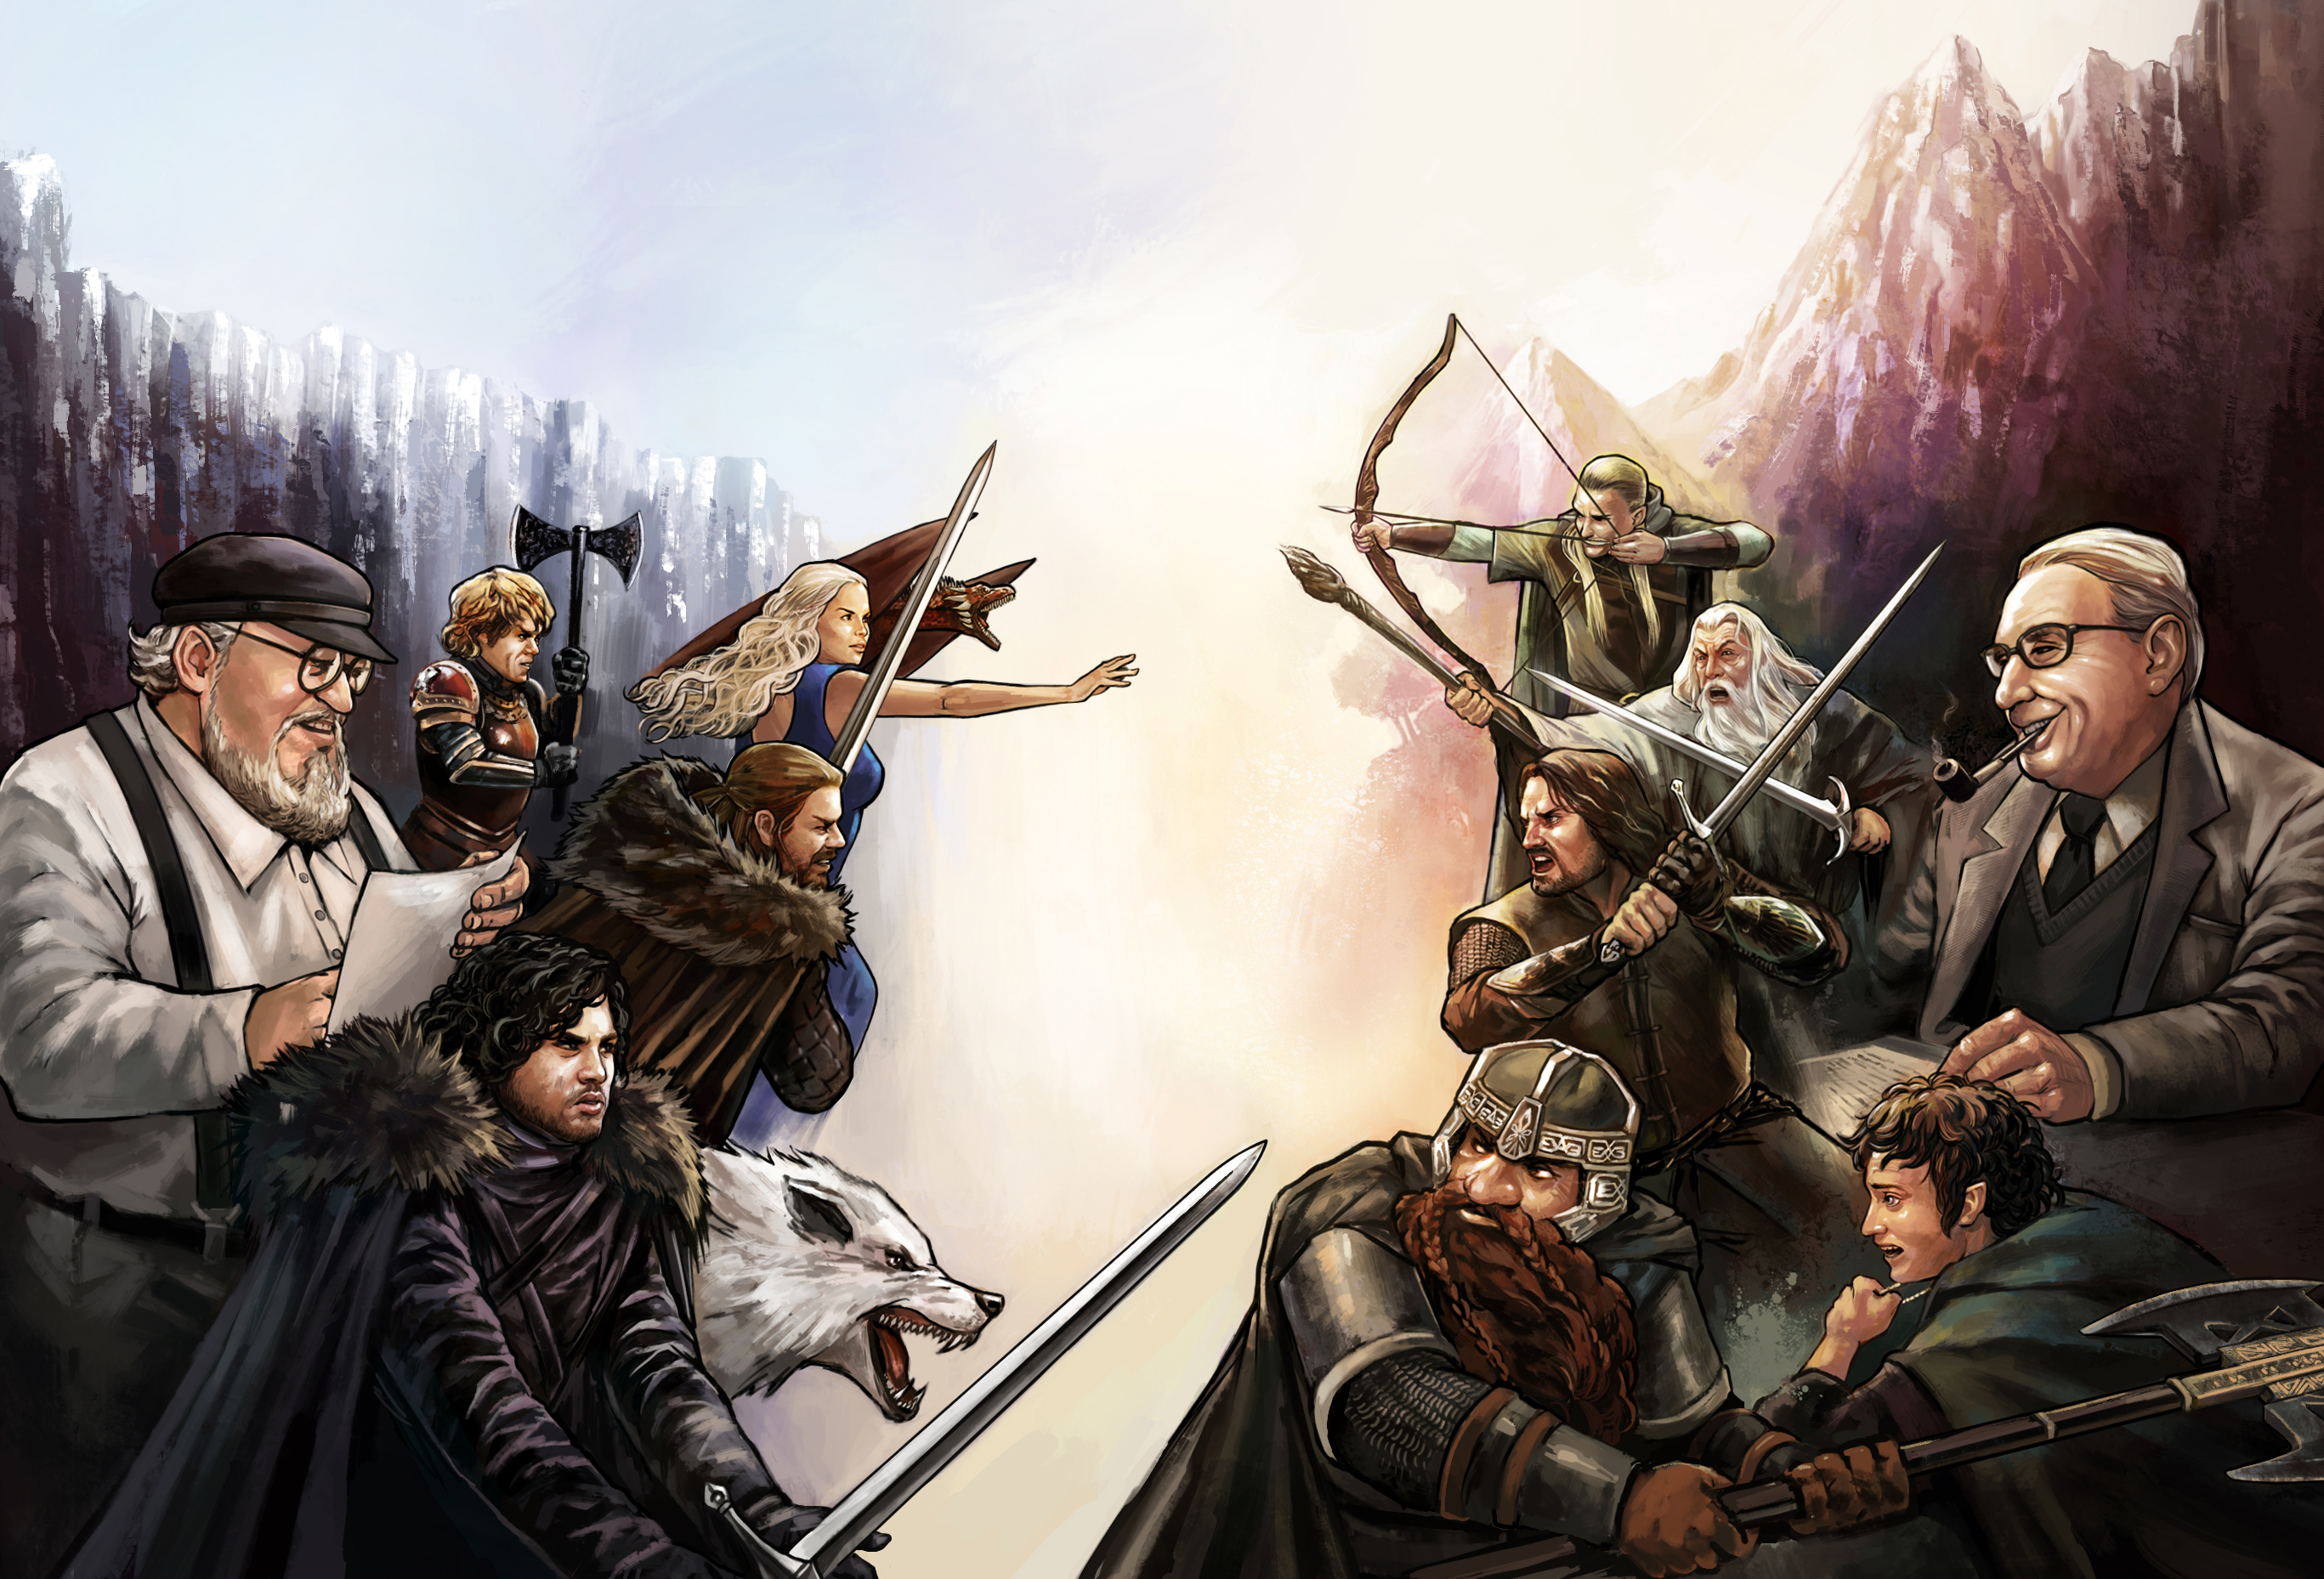 duel_game_of_thrones_x_lord_of_the_rings_by_murilo_araujo-d7gtmxi